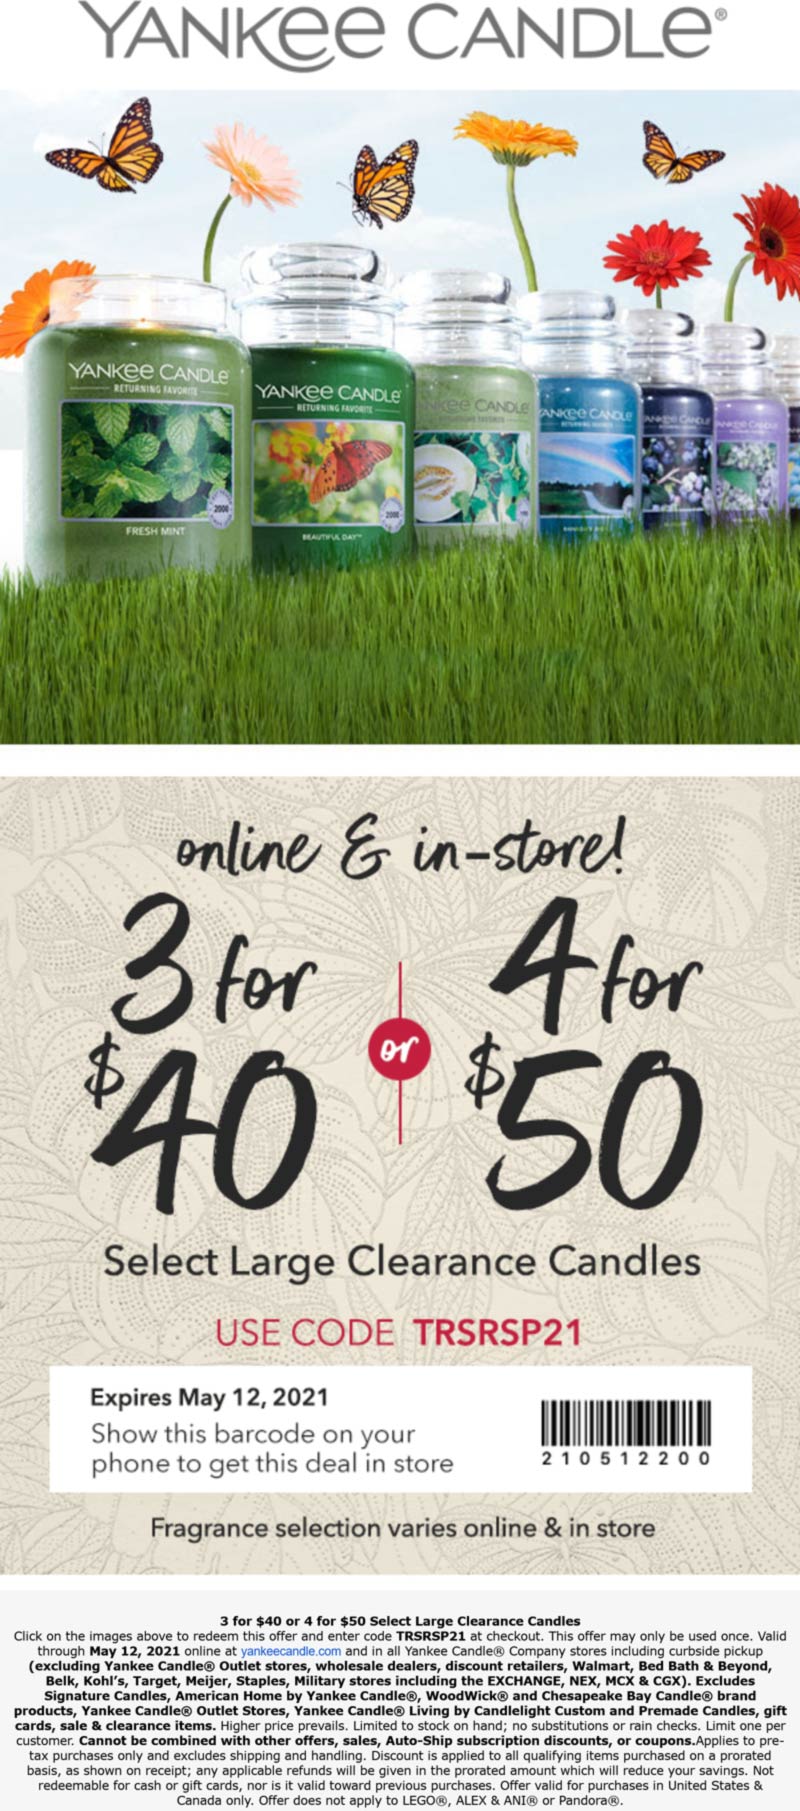 Yankee Candle stores Coupon  Large candle clearance 3 for $40 & more at Yankee Candle, or online via promo code TRSRSP21 #yankeecandle 